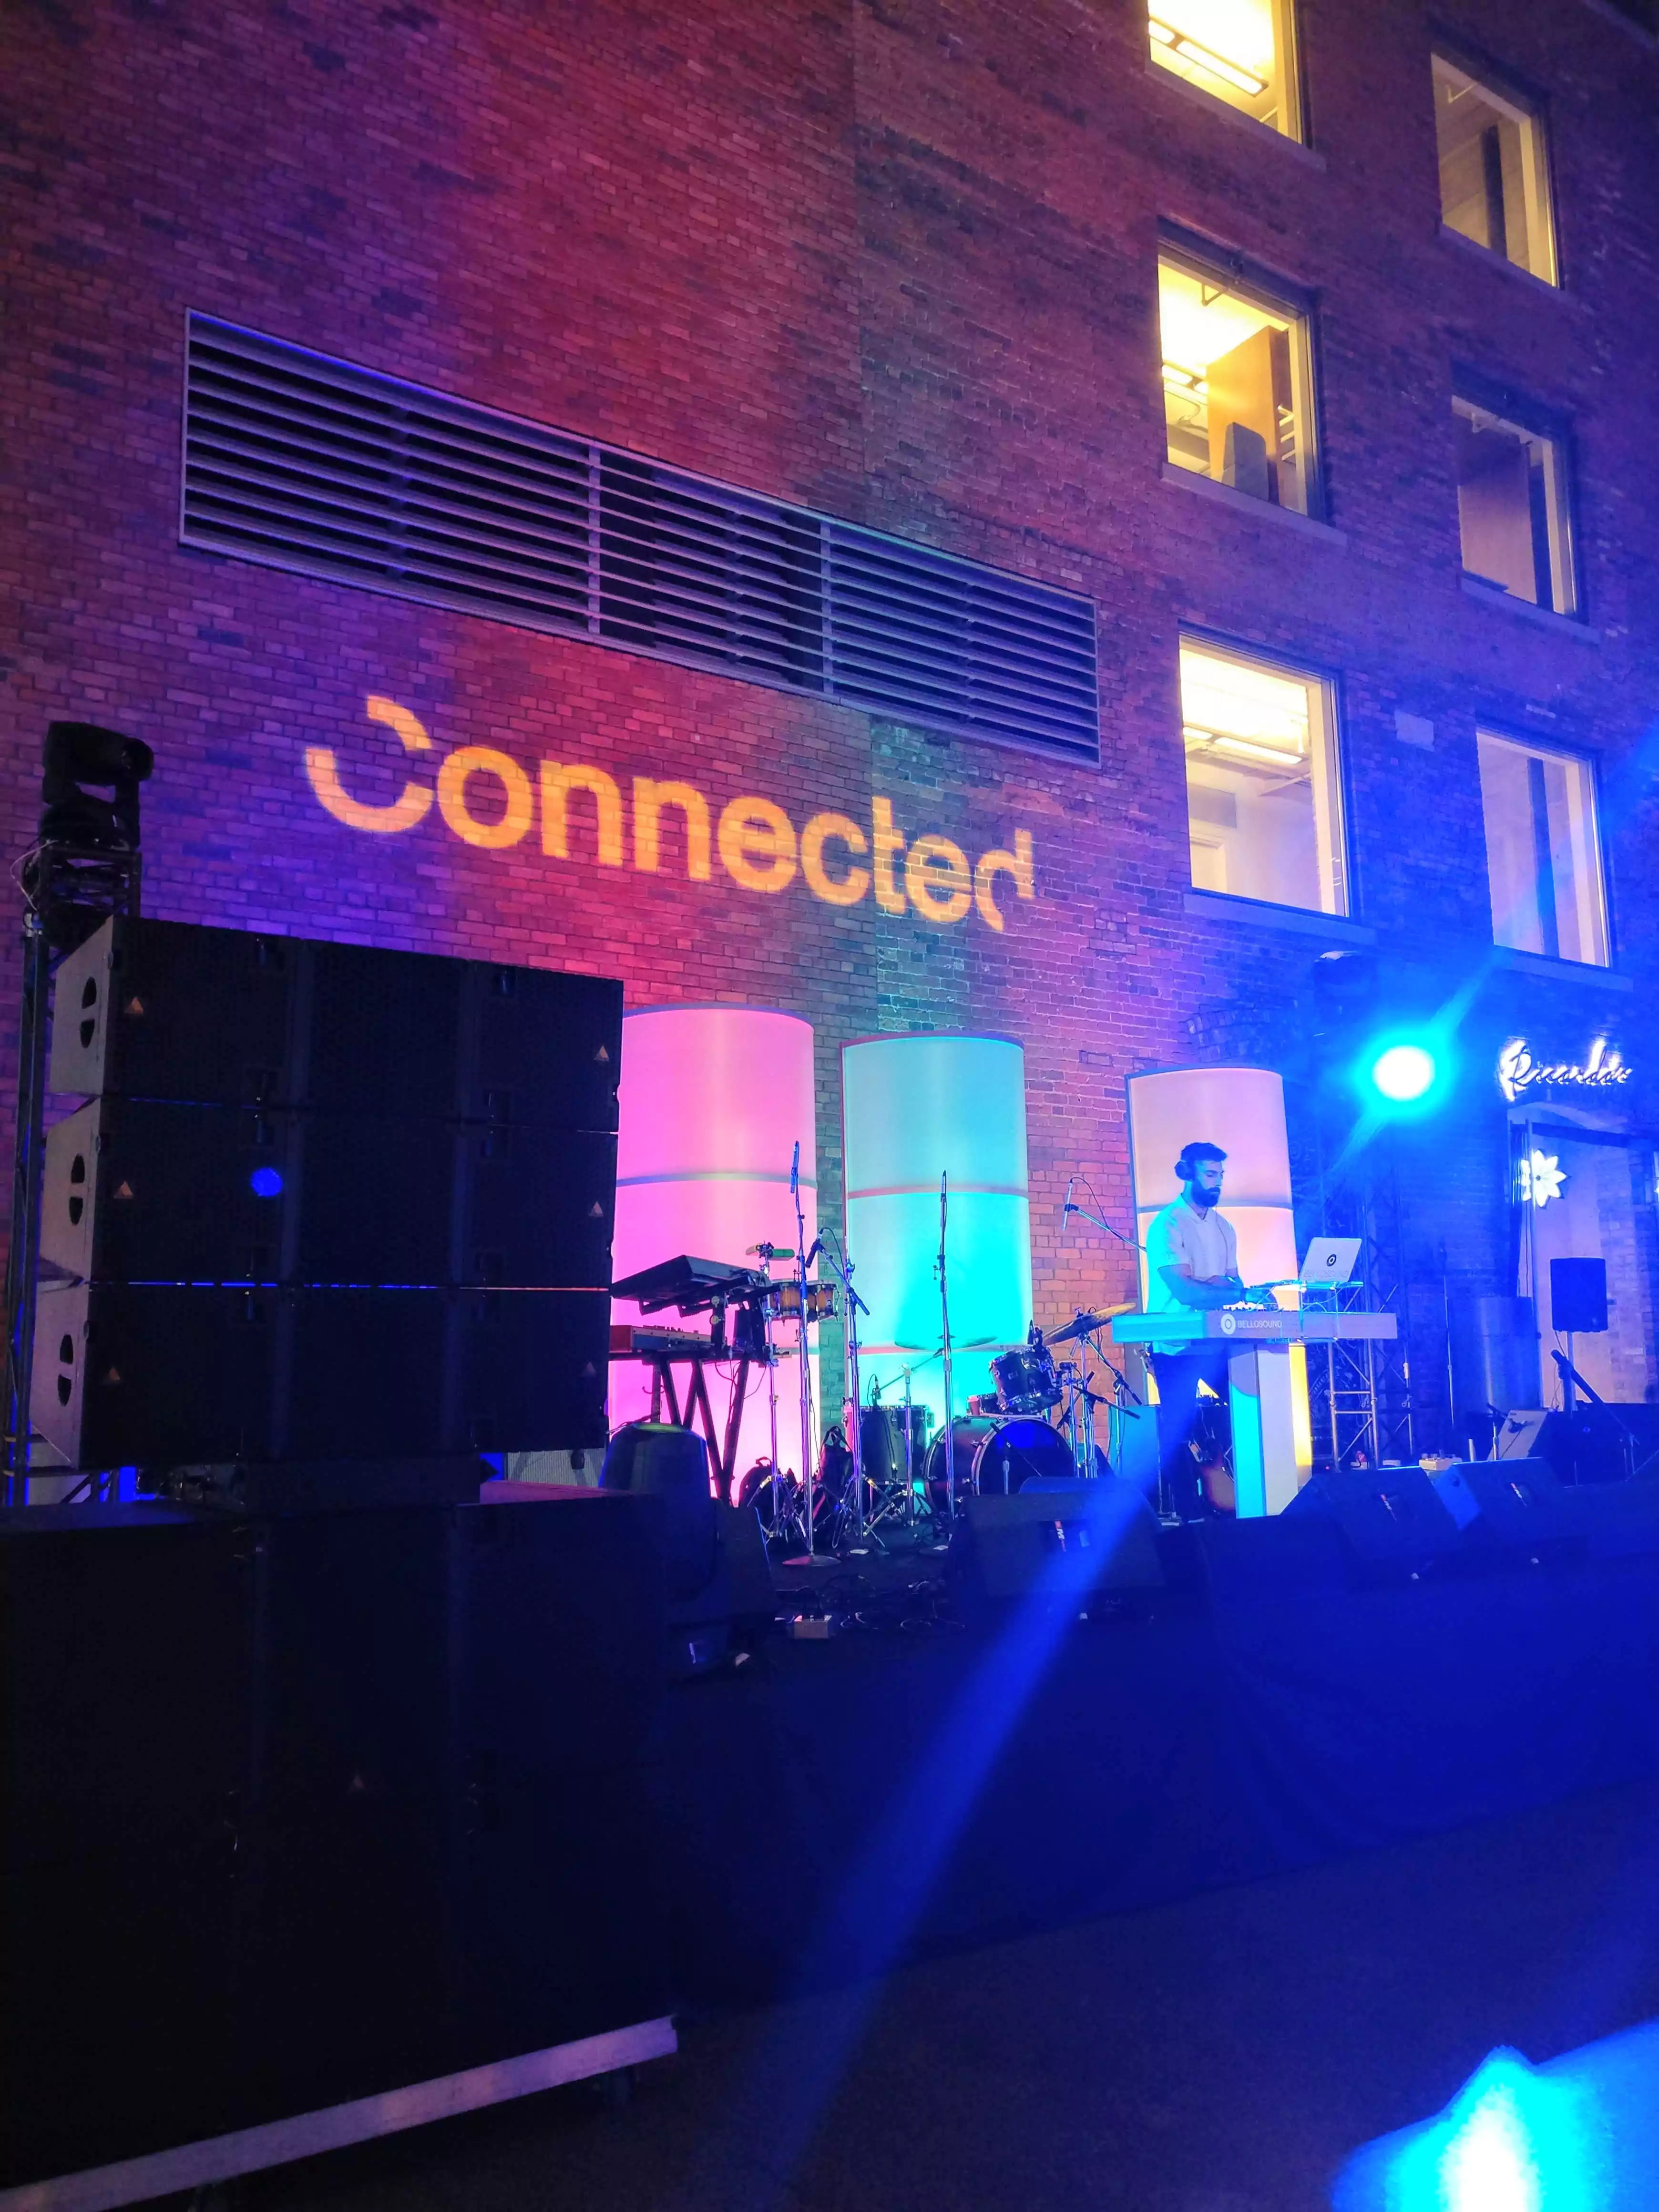 DJ standing in front of a wall backlit with the Connected logo